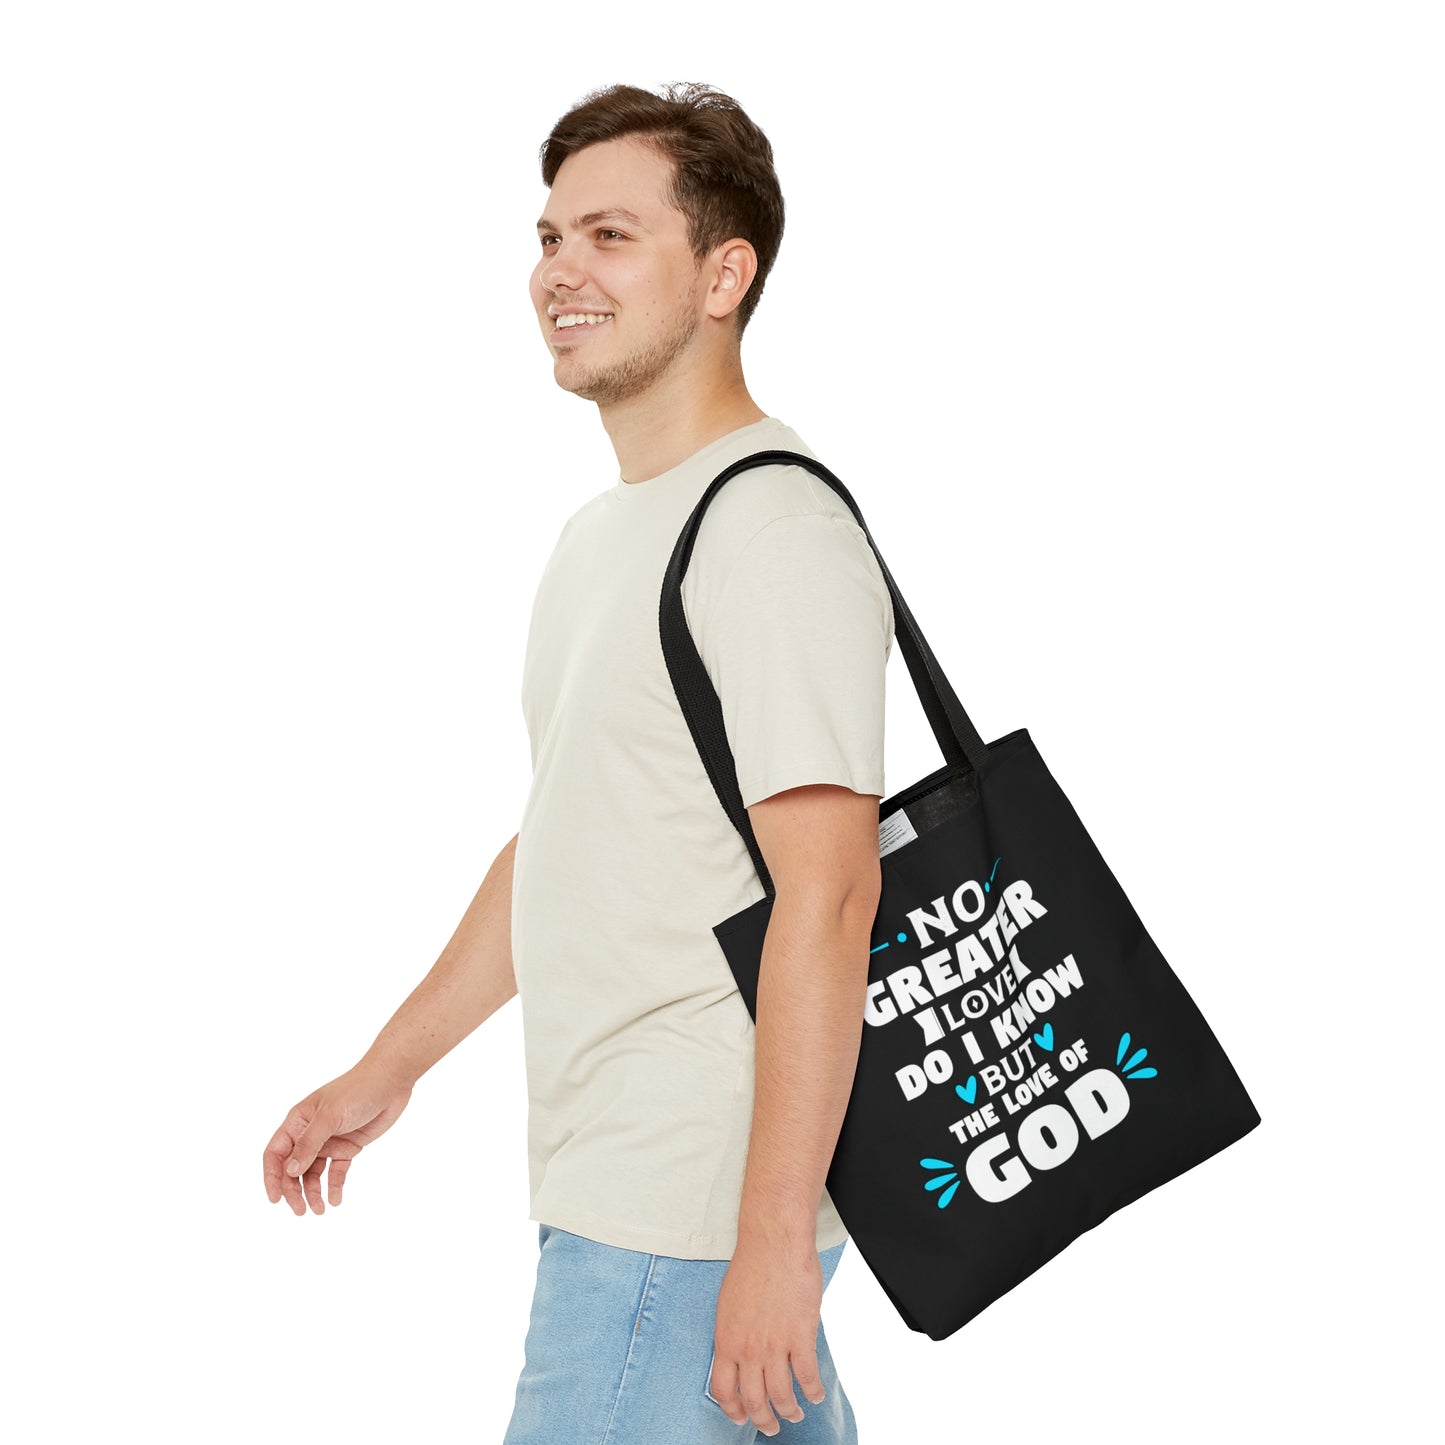 No Greater God Do I Know But The Love Of God Tote Bag